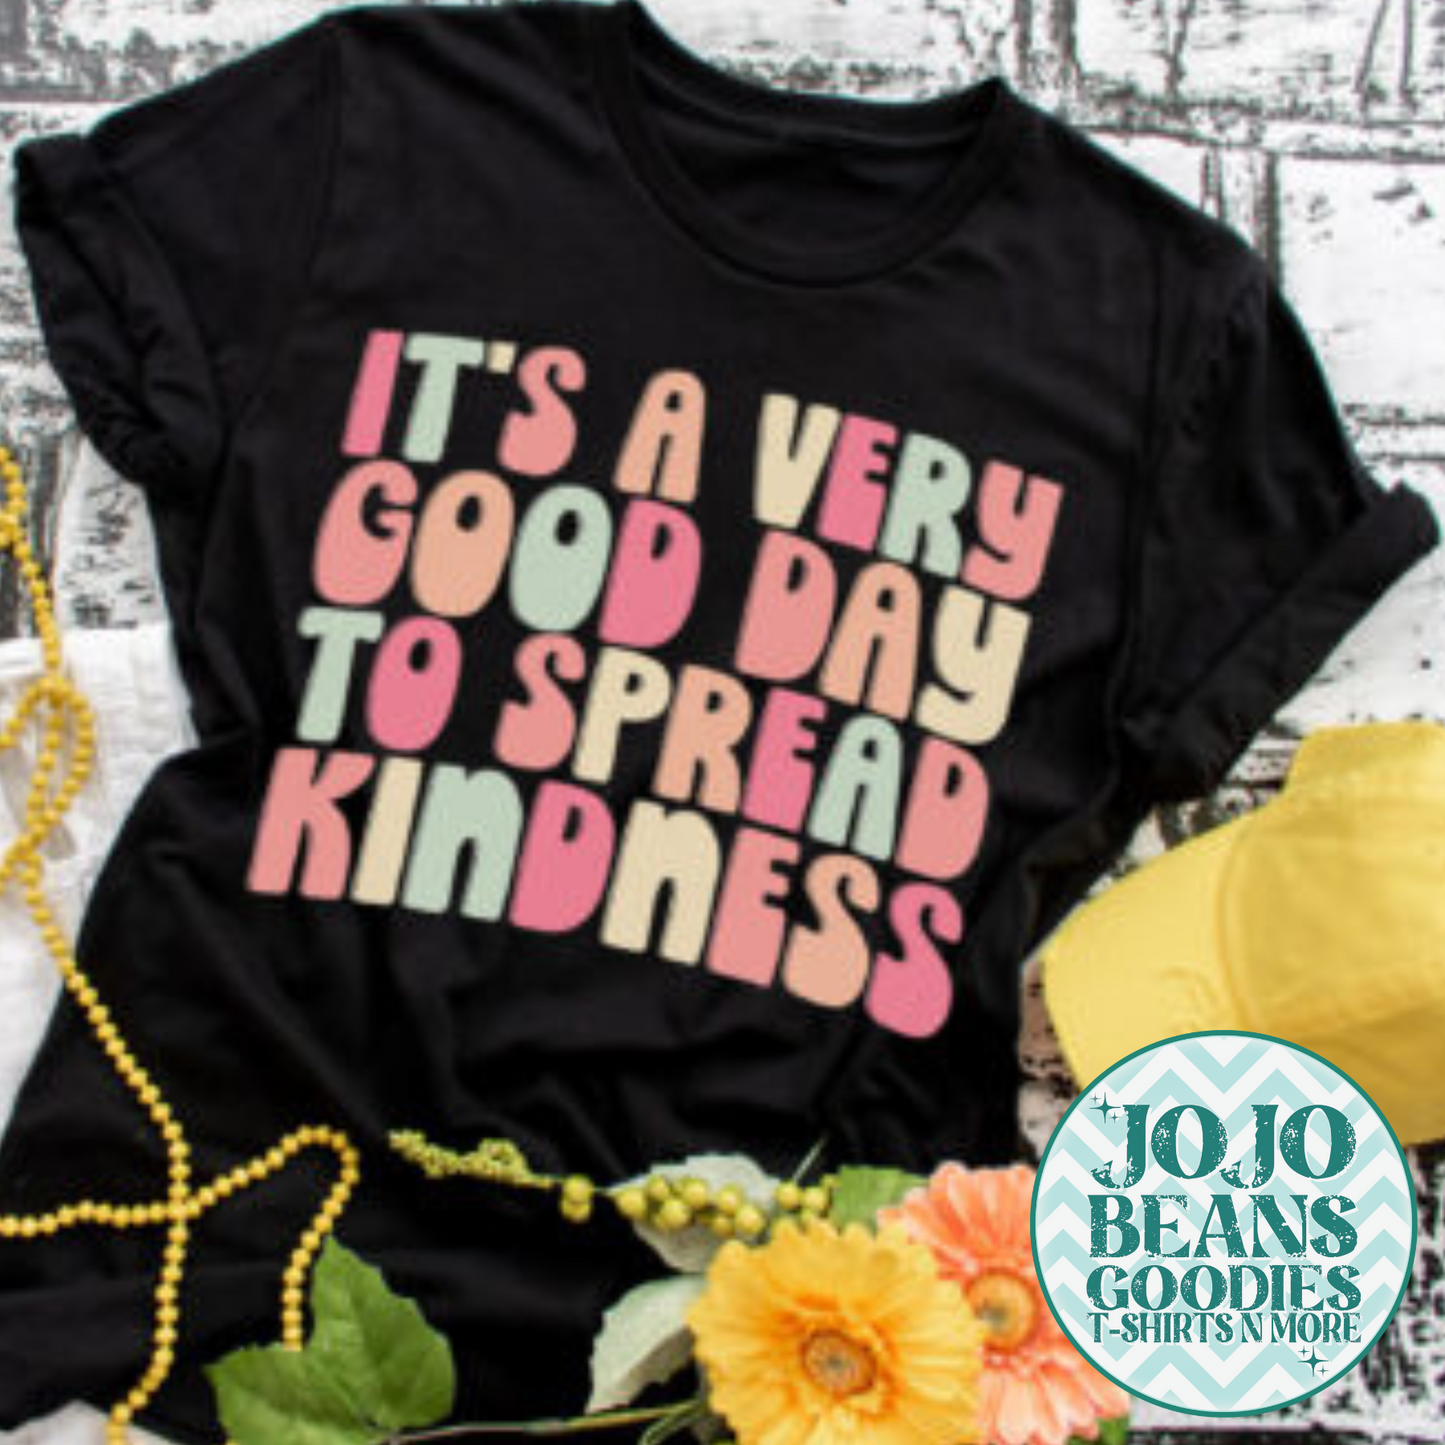 It's A Very Good Day To Spread The Kindness